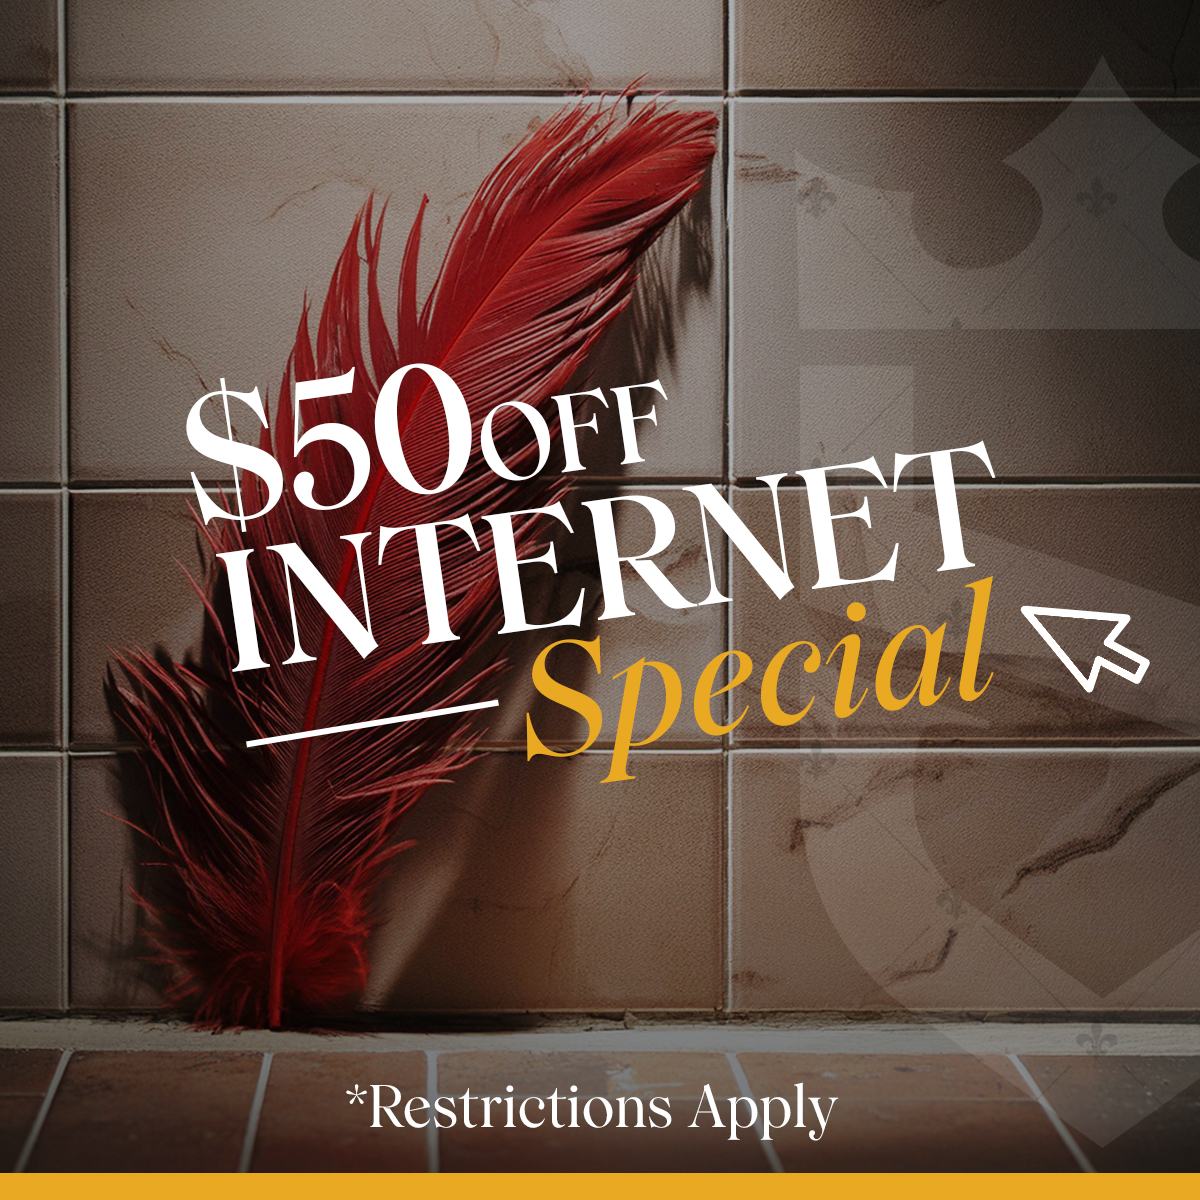 $50 off Internet Special